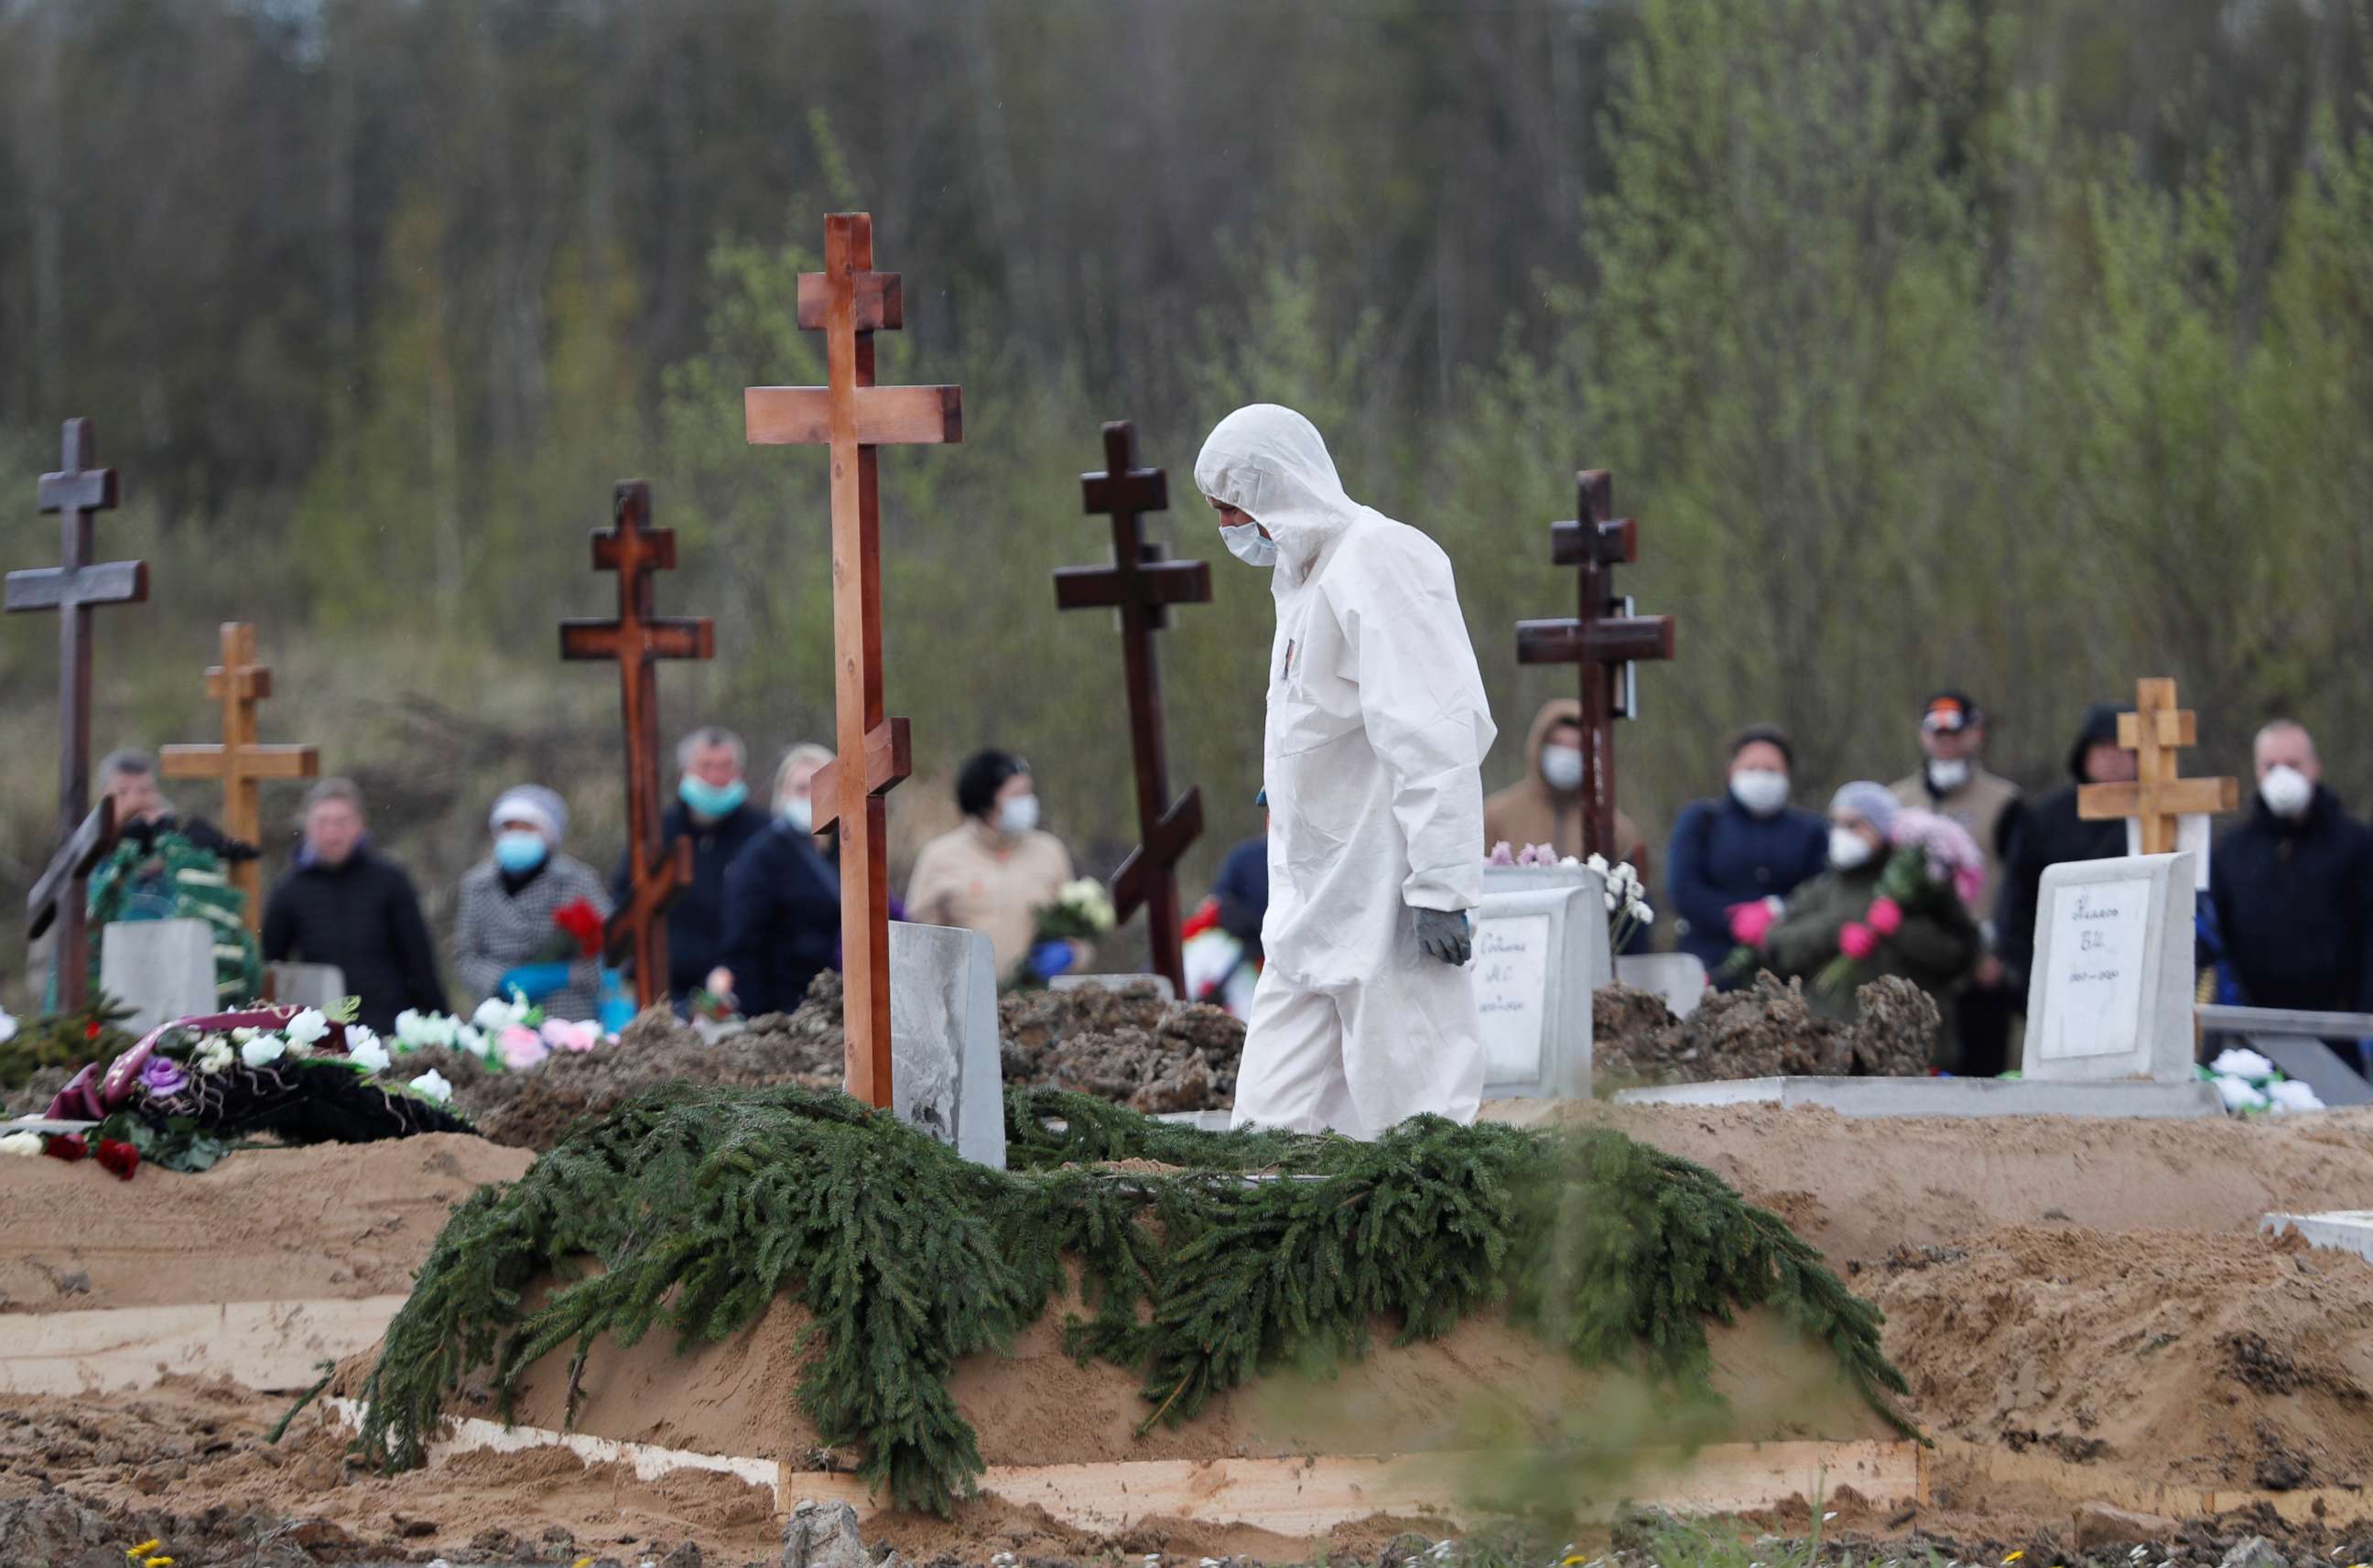 PHOTO: A worker using personal protective equipment walks near a grave while burying a person in a special purpose section of a graveyard on the outskirts of Saint Petersburg, Russia, May 13, 2020.